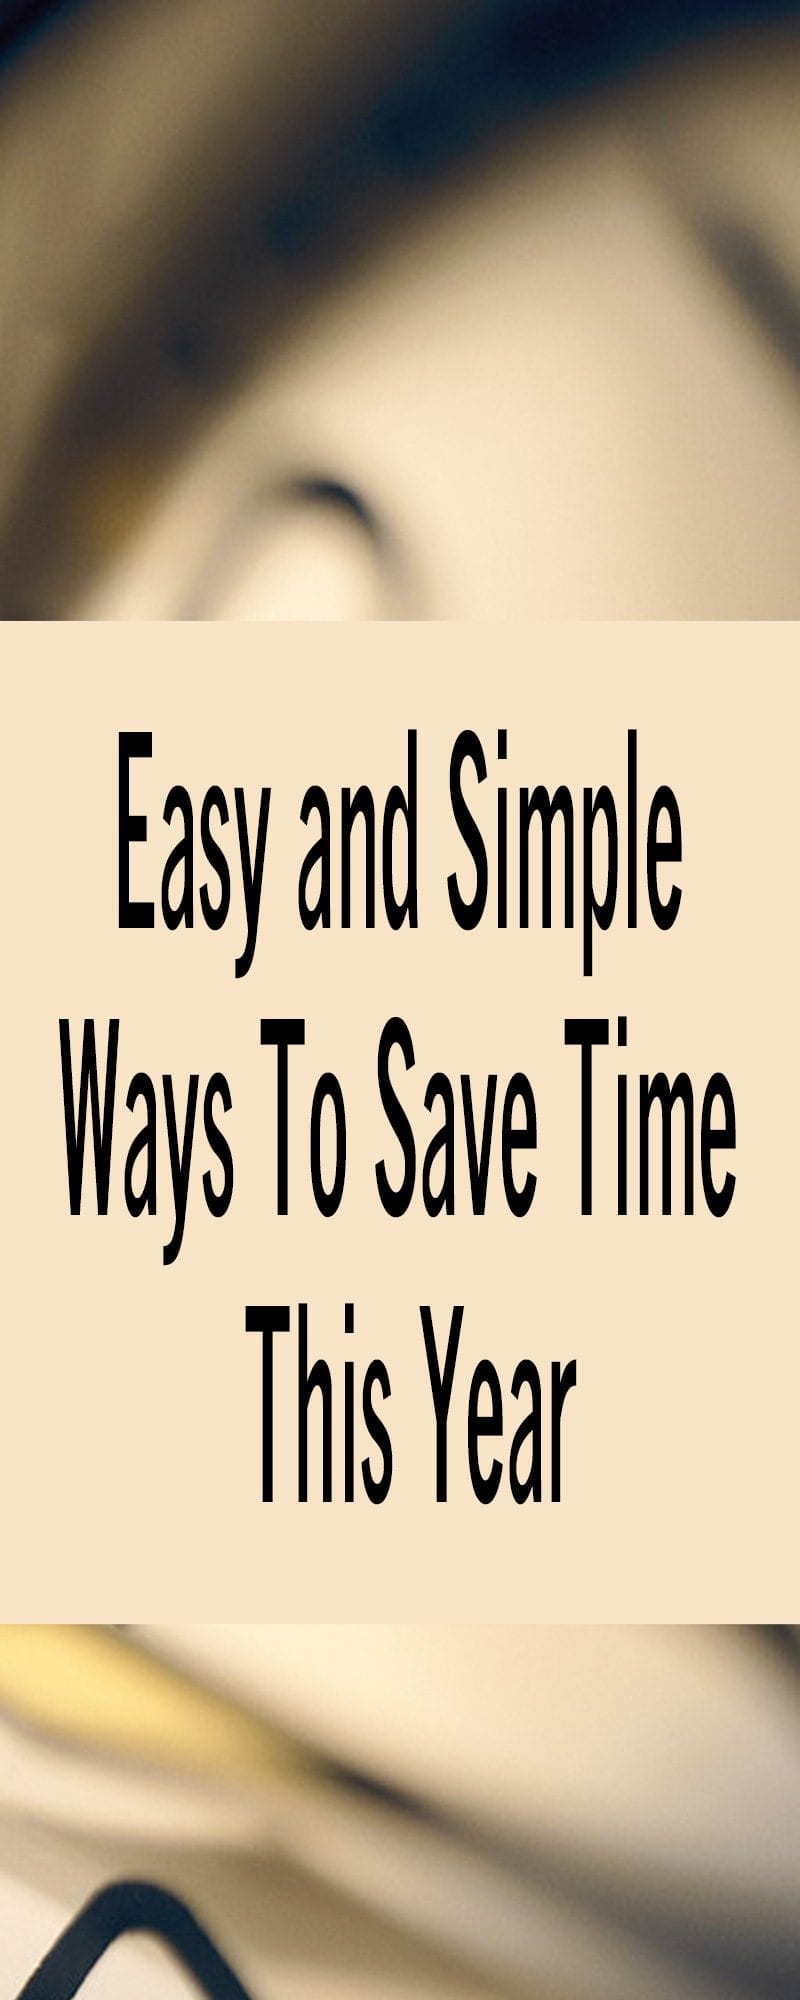 EASY AND SIMPLE WAYS TO SAVE TIME THIS YEAR